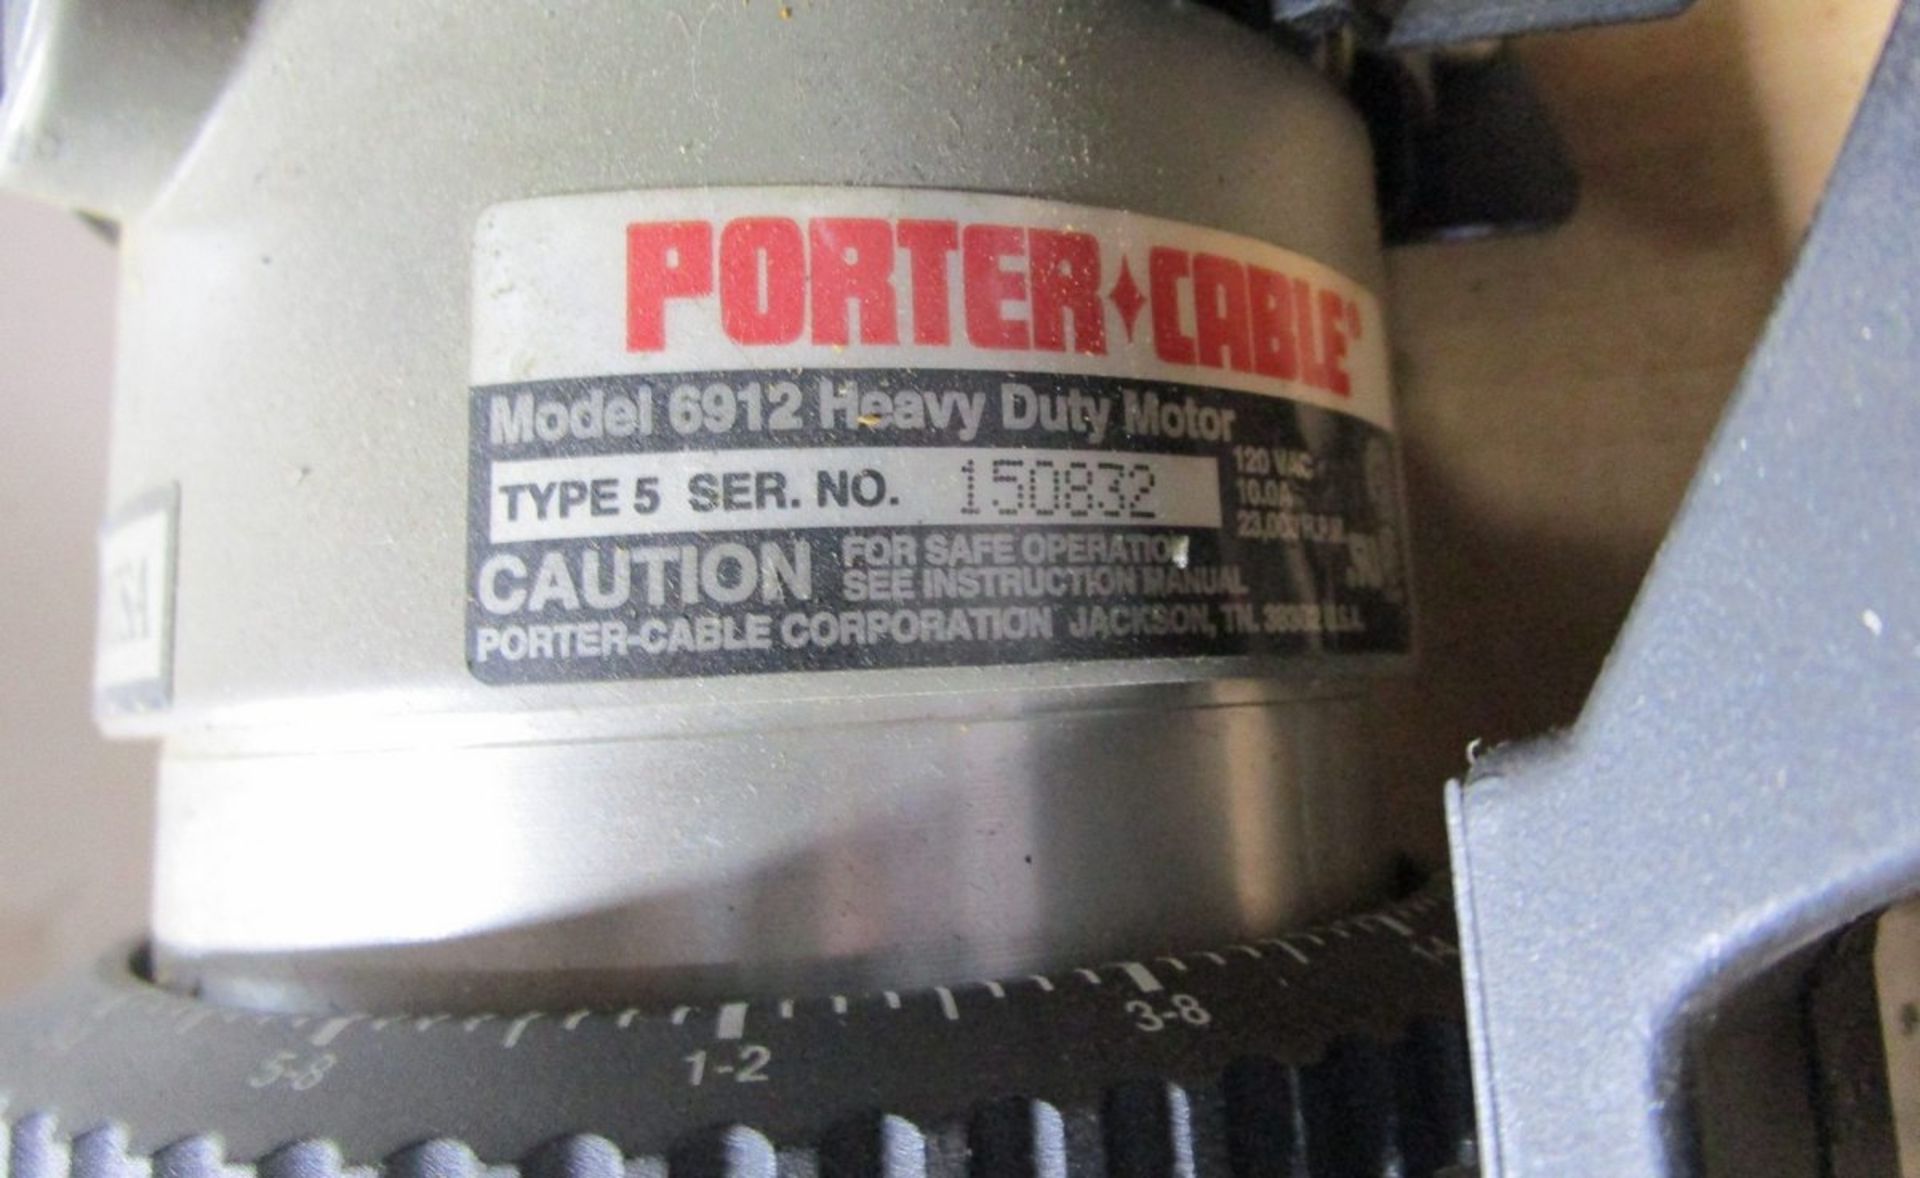 Porter Cable 1-6912 Router Base, S/N 150833 - Image 2 of 2